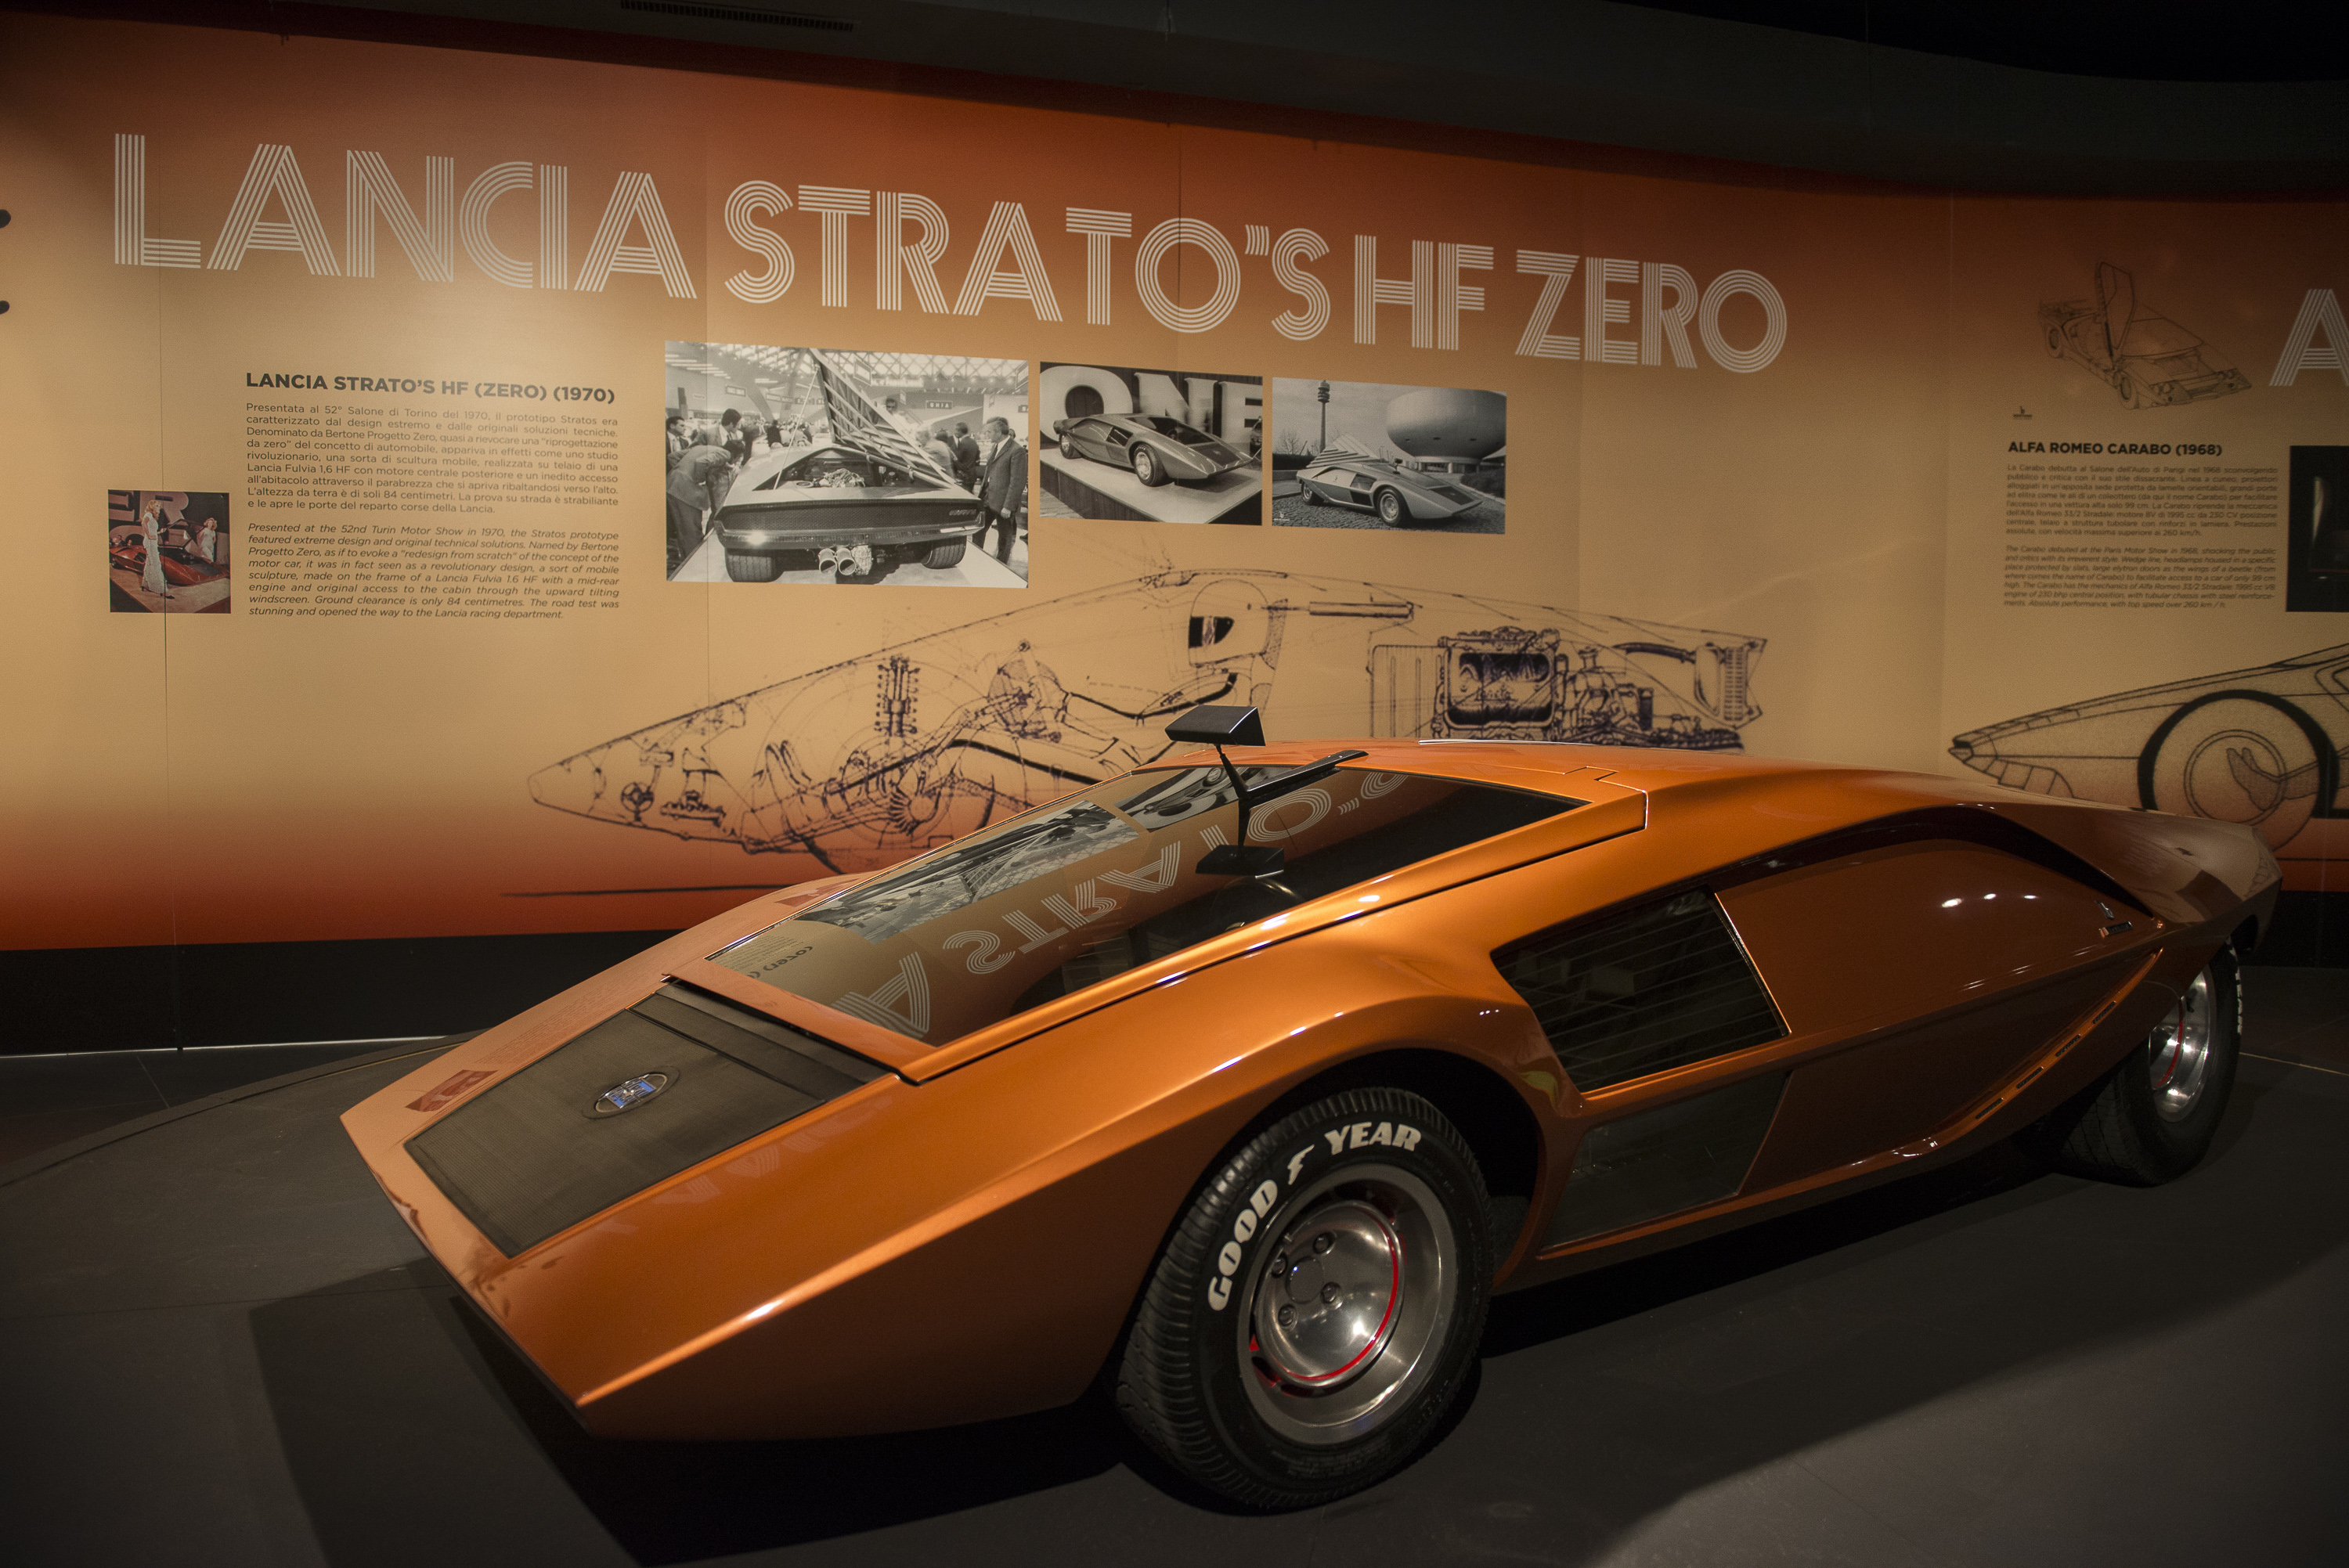 ITALY, TURIN, PIEDMONT - 2019/01/23: Detail of a Lancia Strato's HF zero car during the exhibition dedicated to Marcello Gandini the hidden genius at the Museo Nazionale dell'Automobile in Turin. Marcello Gandini is an Italian car designer. He has designed some of the most beautiful Italian cars since the mid-sixties for various car manufacturers such as Lamborghini, Alfa Romeo and Lancia. (Photo by Stefano Guidi/LightRocket via Getty Images)